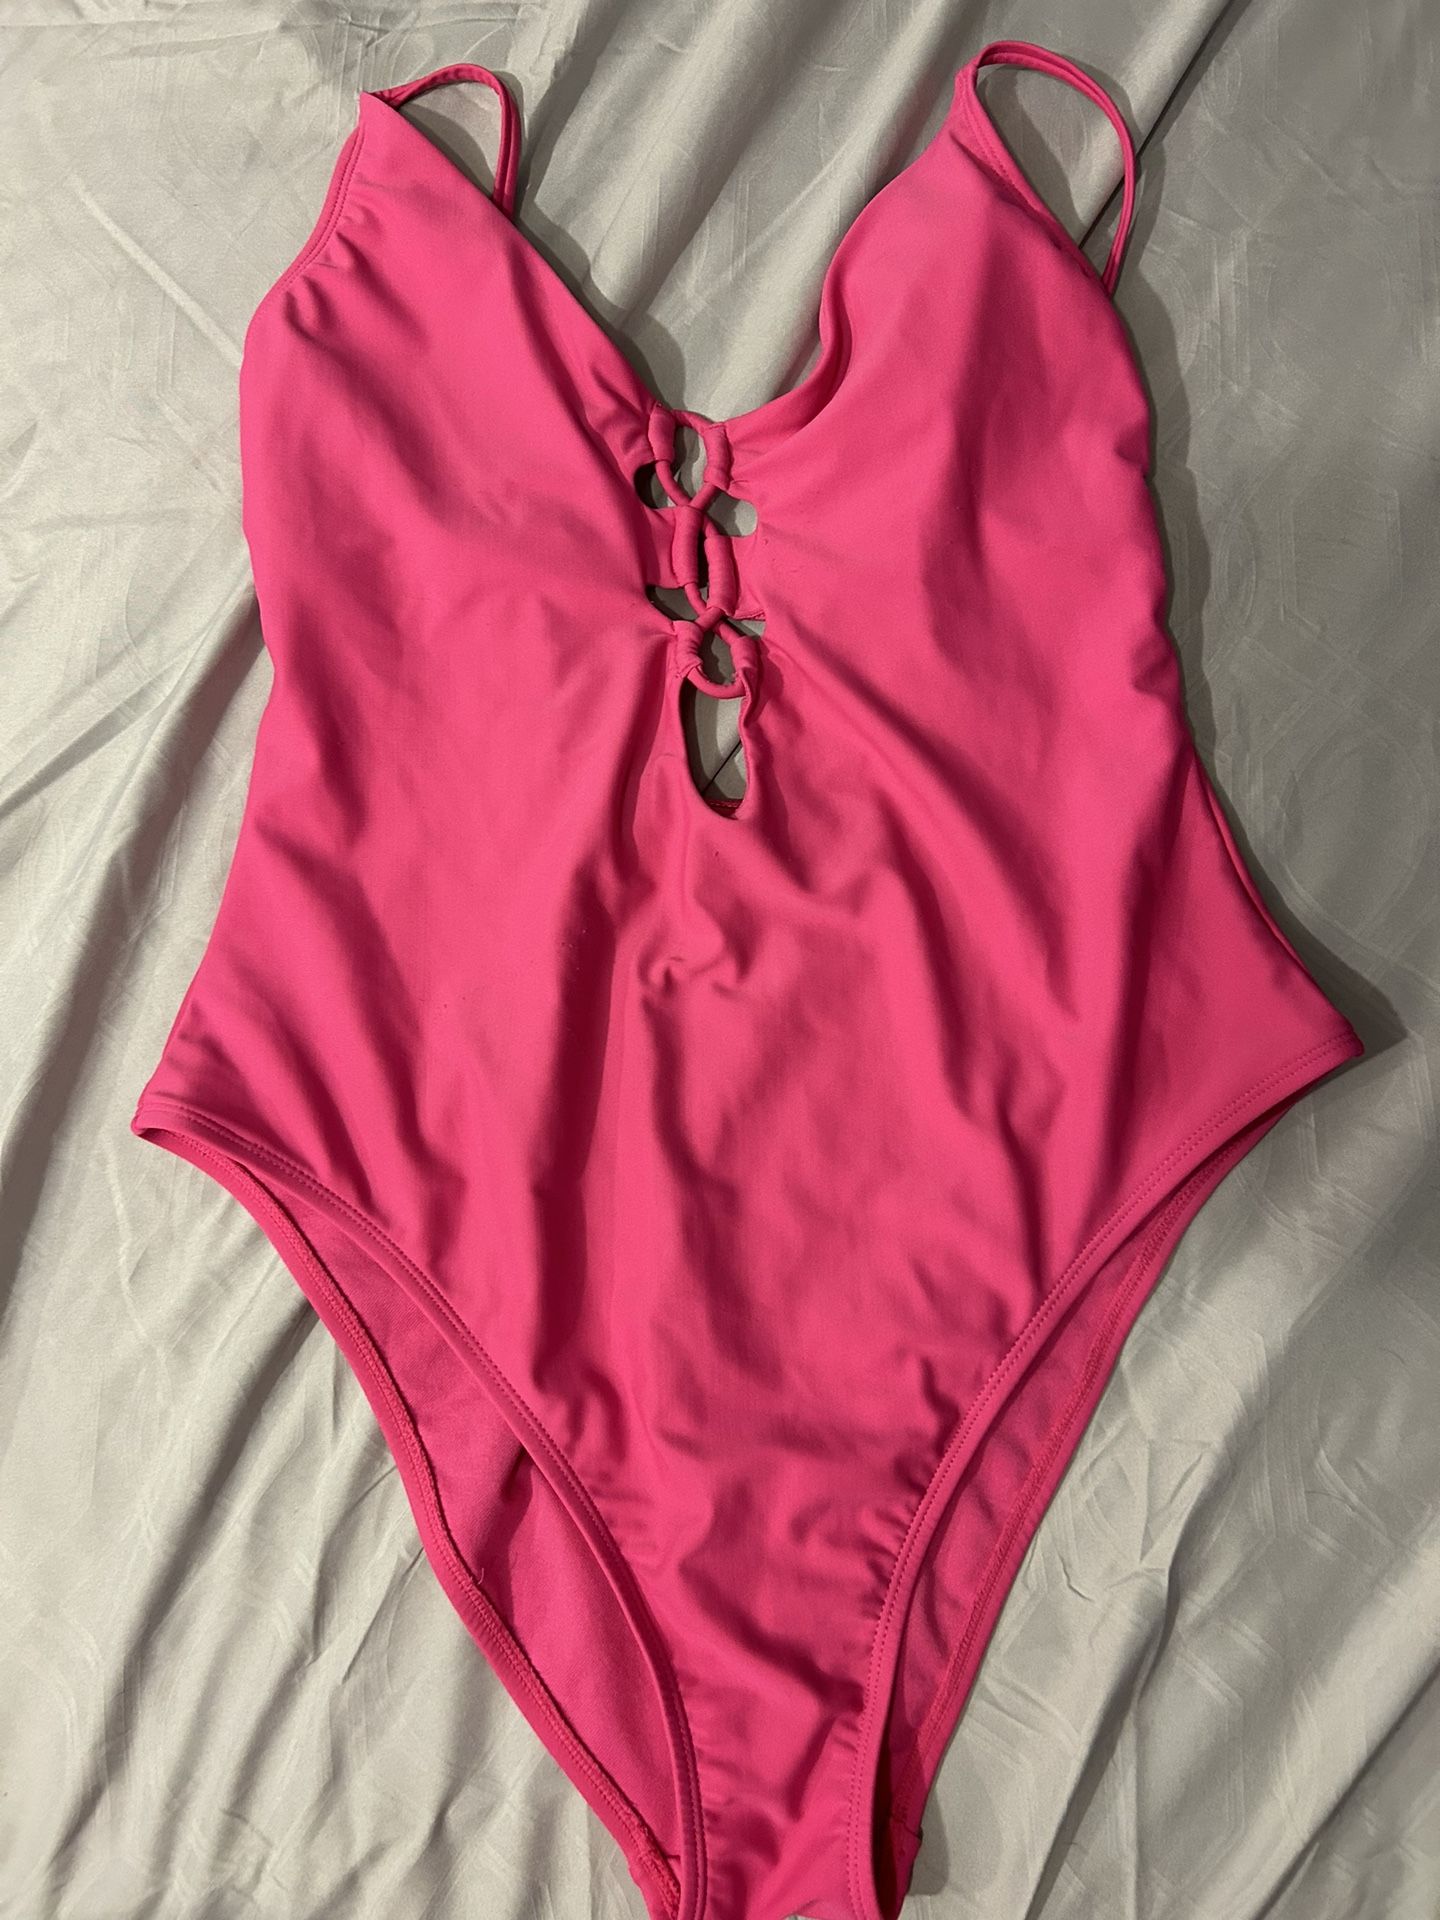 Hot pink shade and shore bathing suit- one piece 